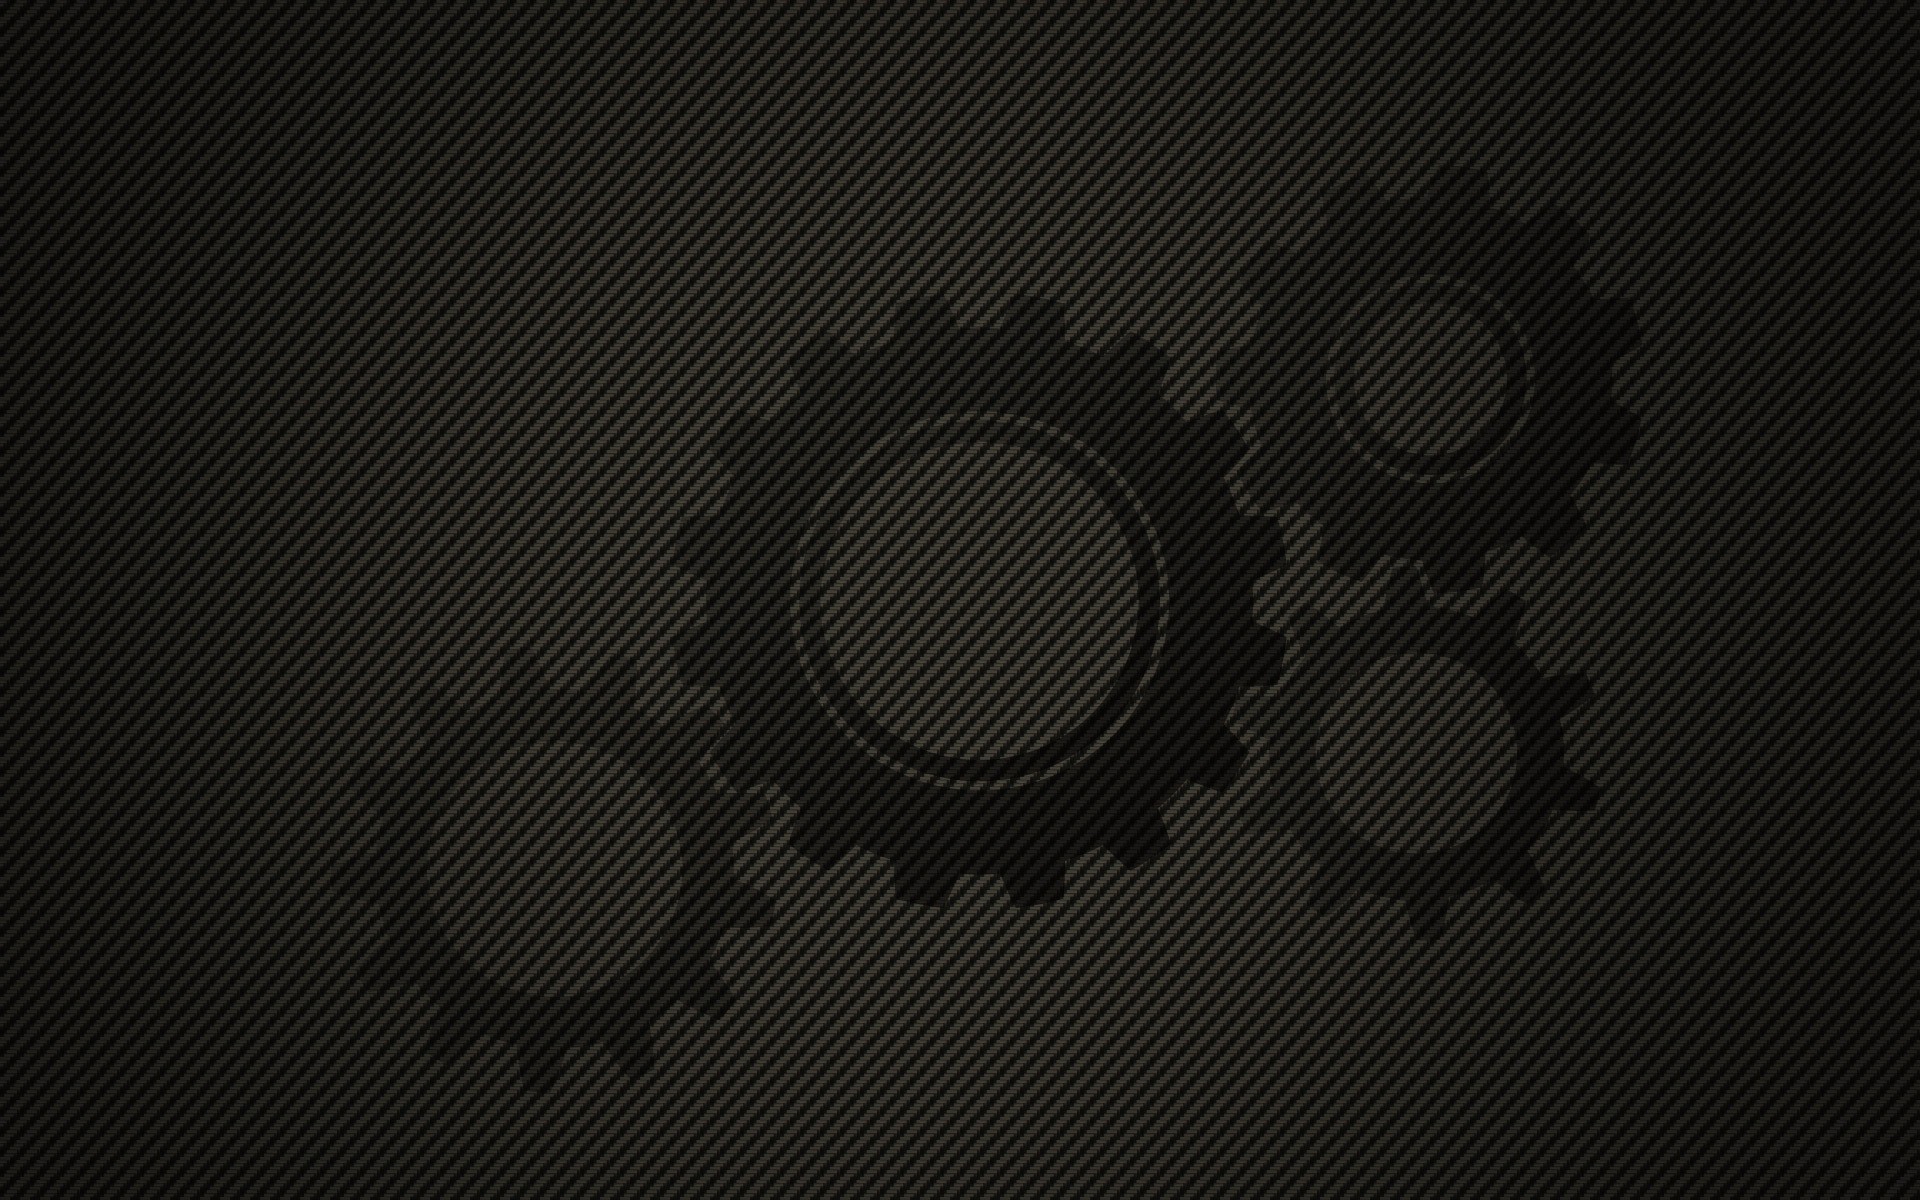 Gears Diagonal Lines Black Background Gray Background 1920x1200